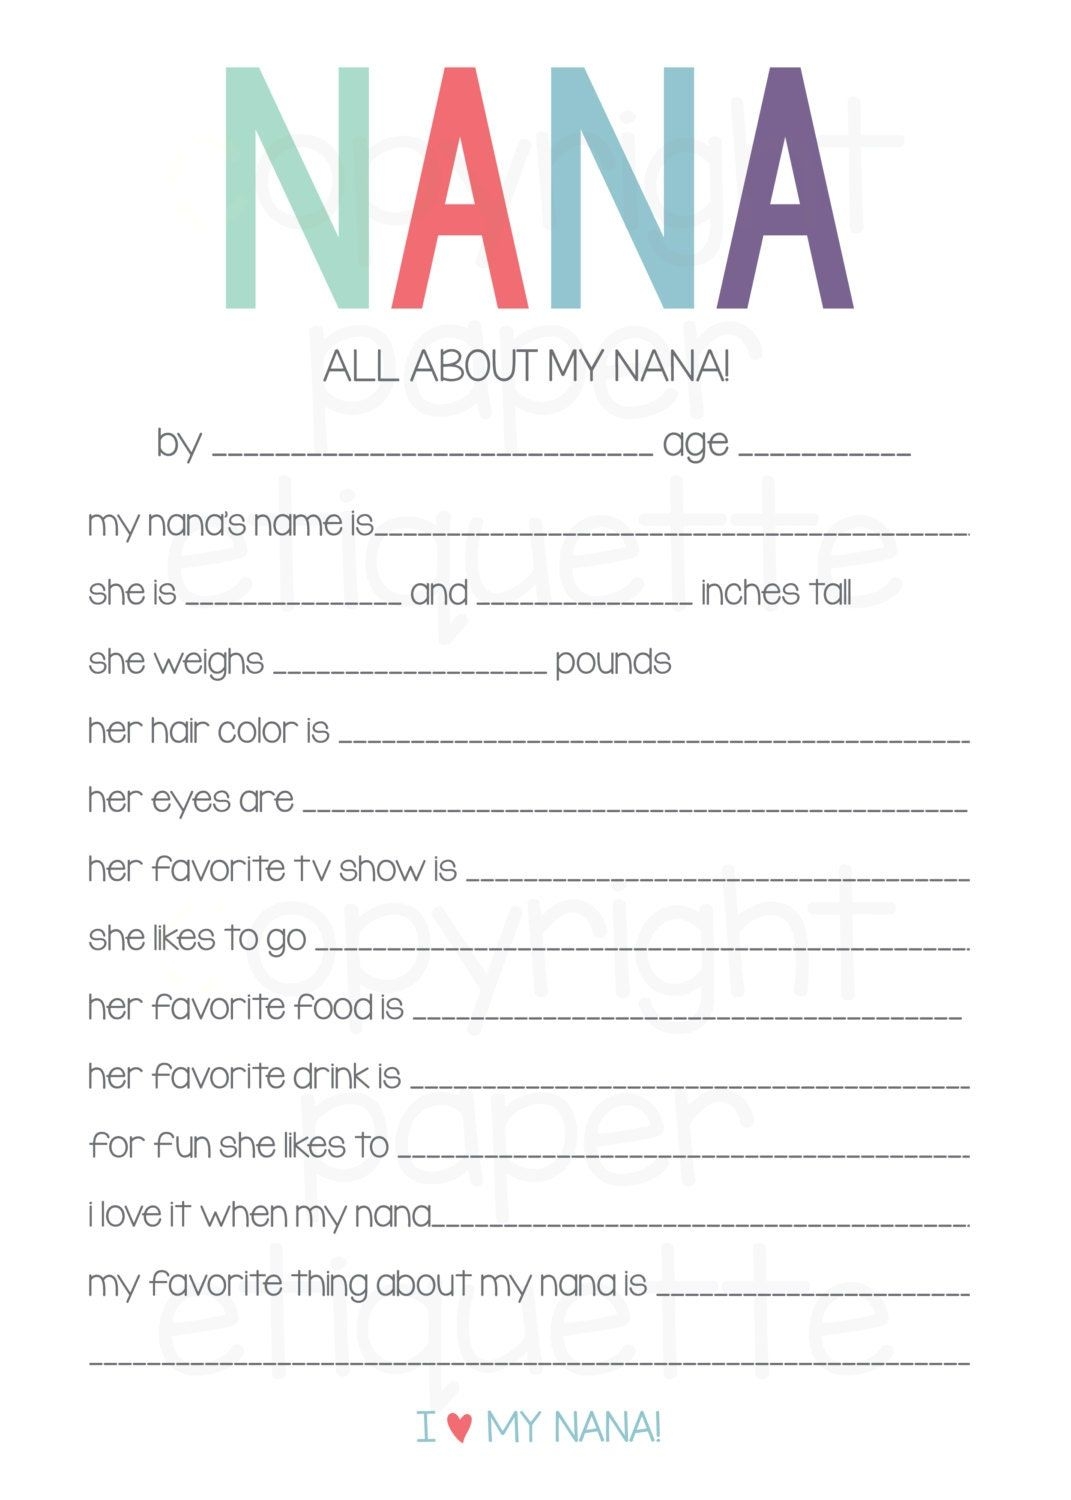 All About My Nana Printable Mother s Day Gift Nana Valentine Mother s Day Gift Mom Gift Happy Mother s Day Nana Gift Keepsake Nana Etsy Canada Mothers Day Saying Nana Gifts 